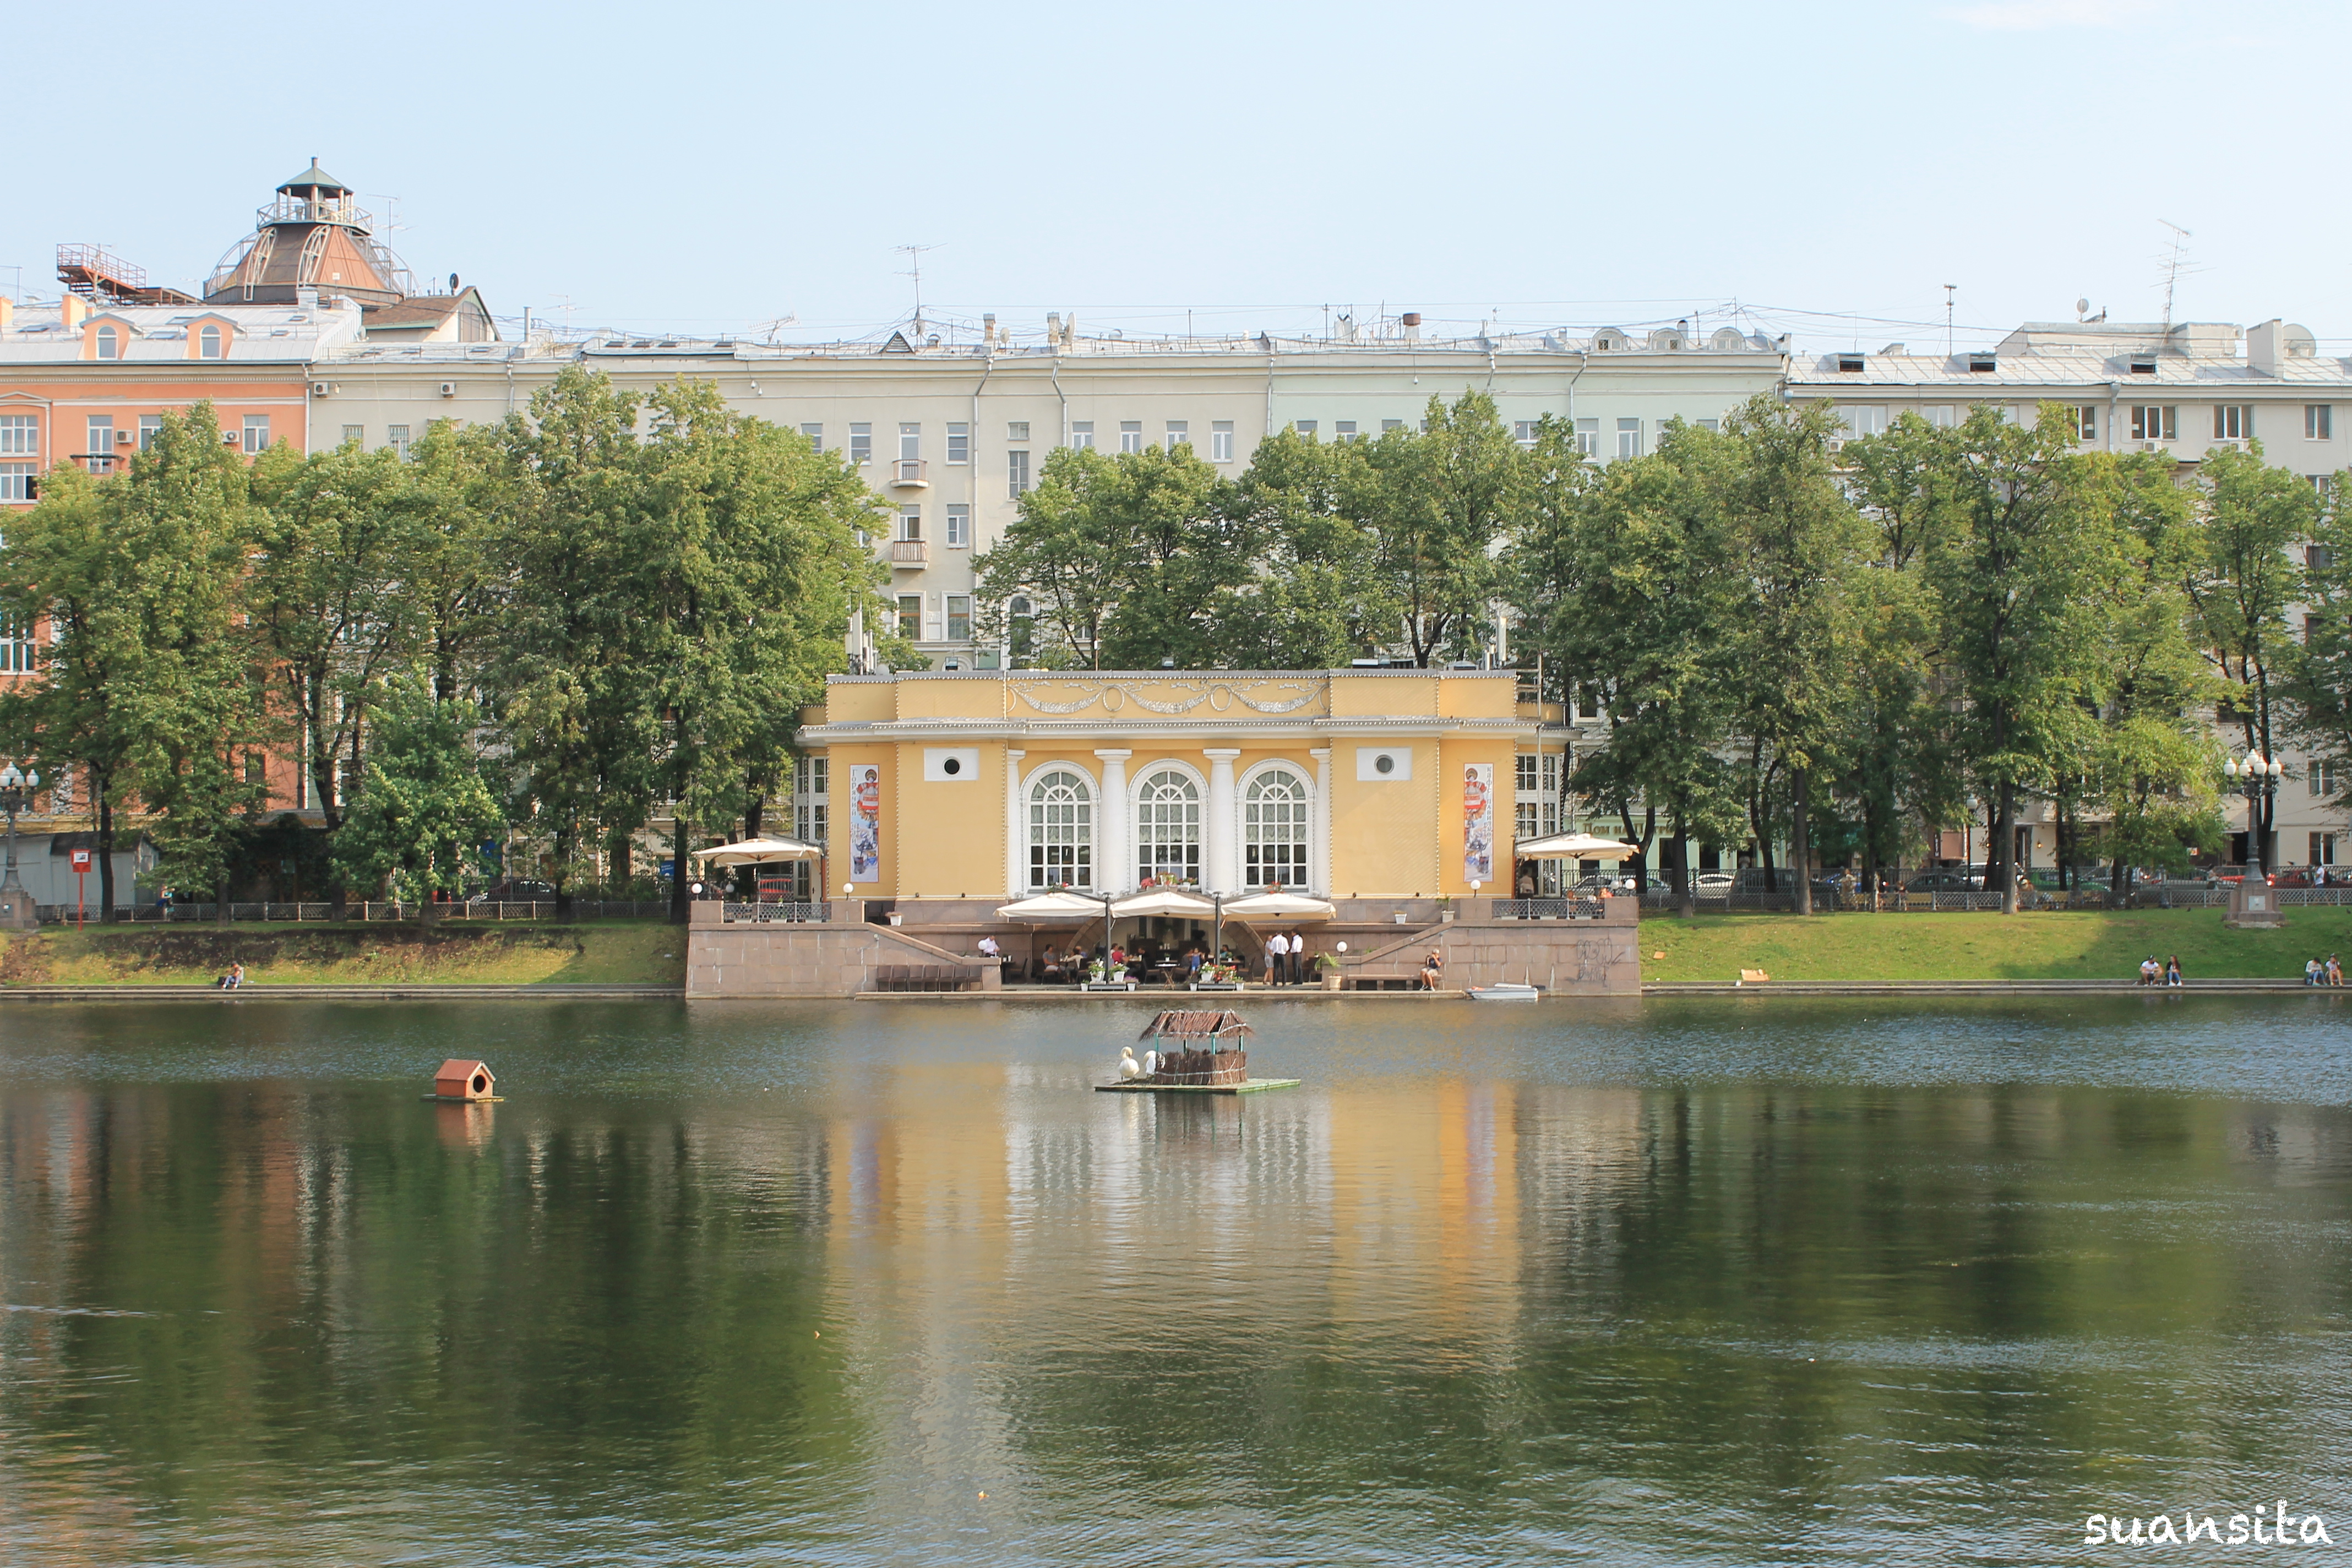 Patriarch's Pond, where the opening scene from Bulgakov's The Master and Margarita takes place.